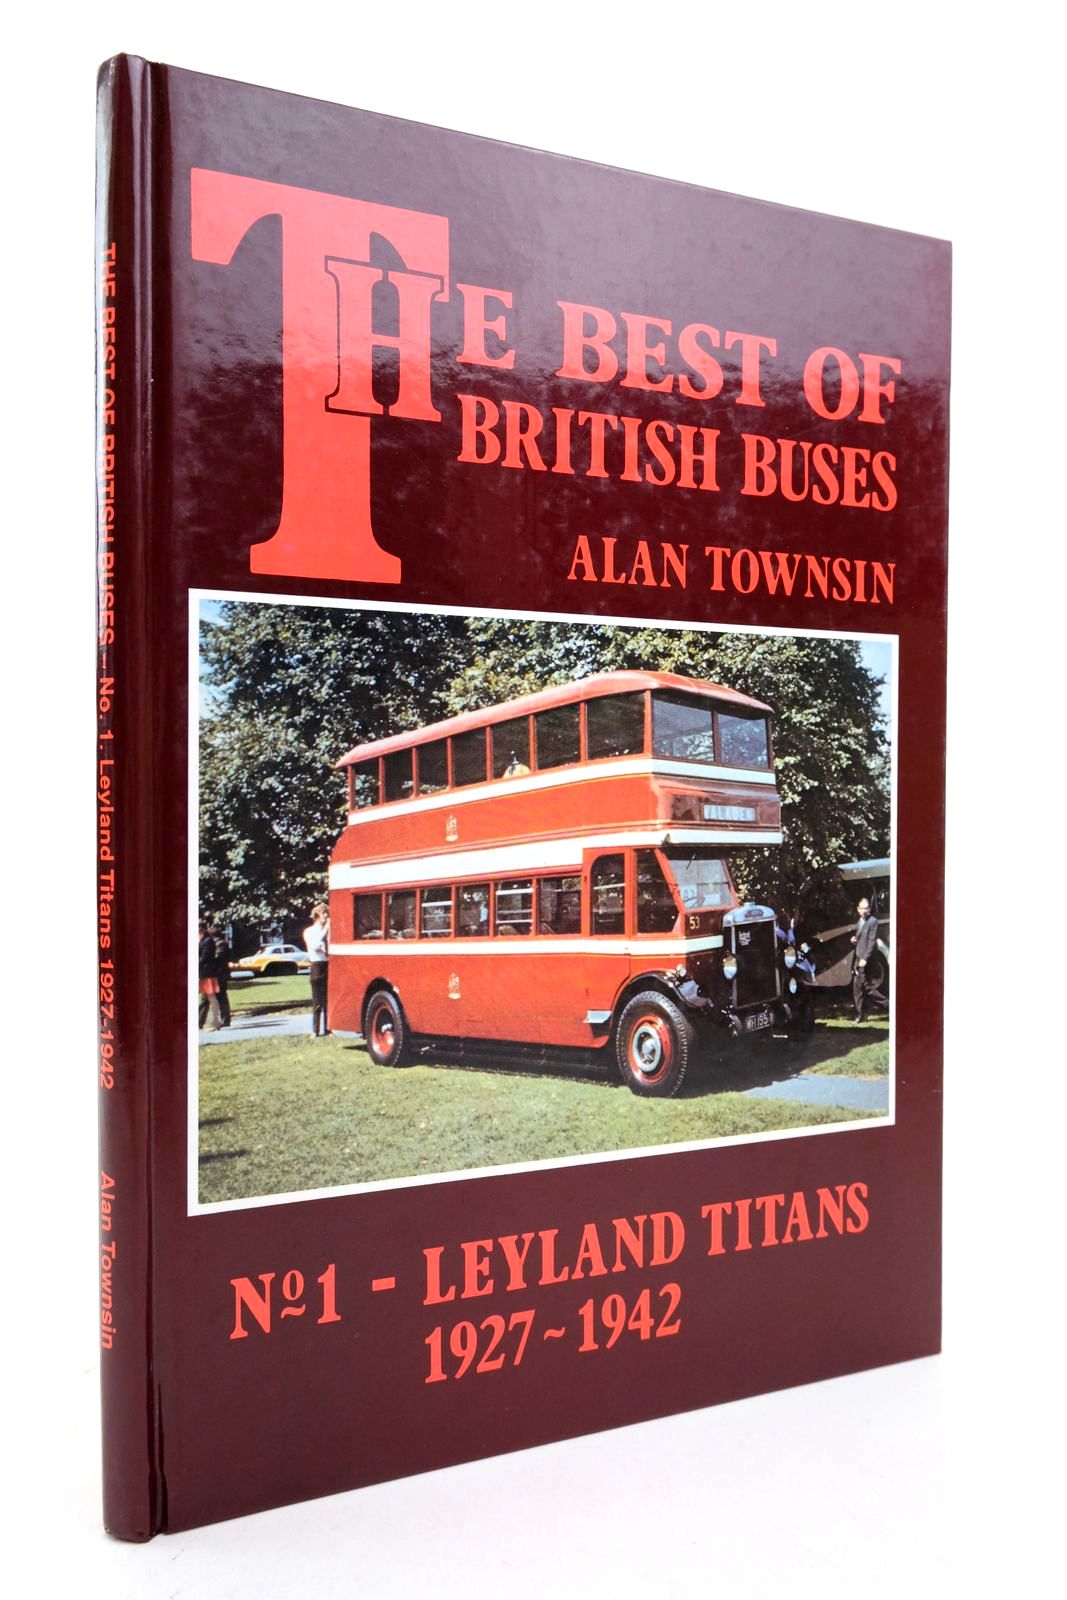 Photo of THE BEST OF BRITISH BUSES No. 1 LEYLAND TITANS 1927-1942 written by Townsin, Alan published by Booklaw Railbus (STOCK CODE: 2139655)  for sale by Stella & Rose's Books